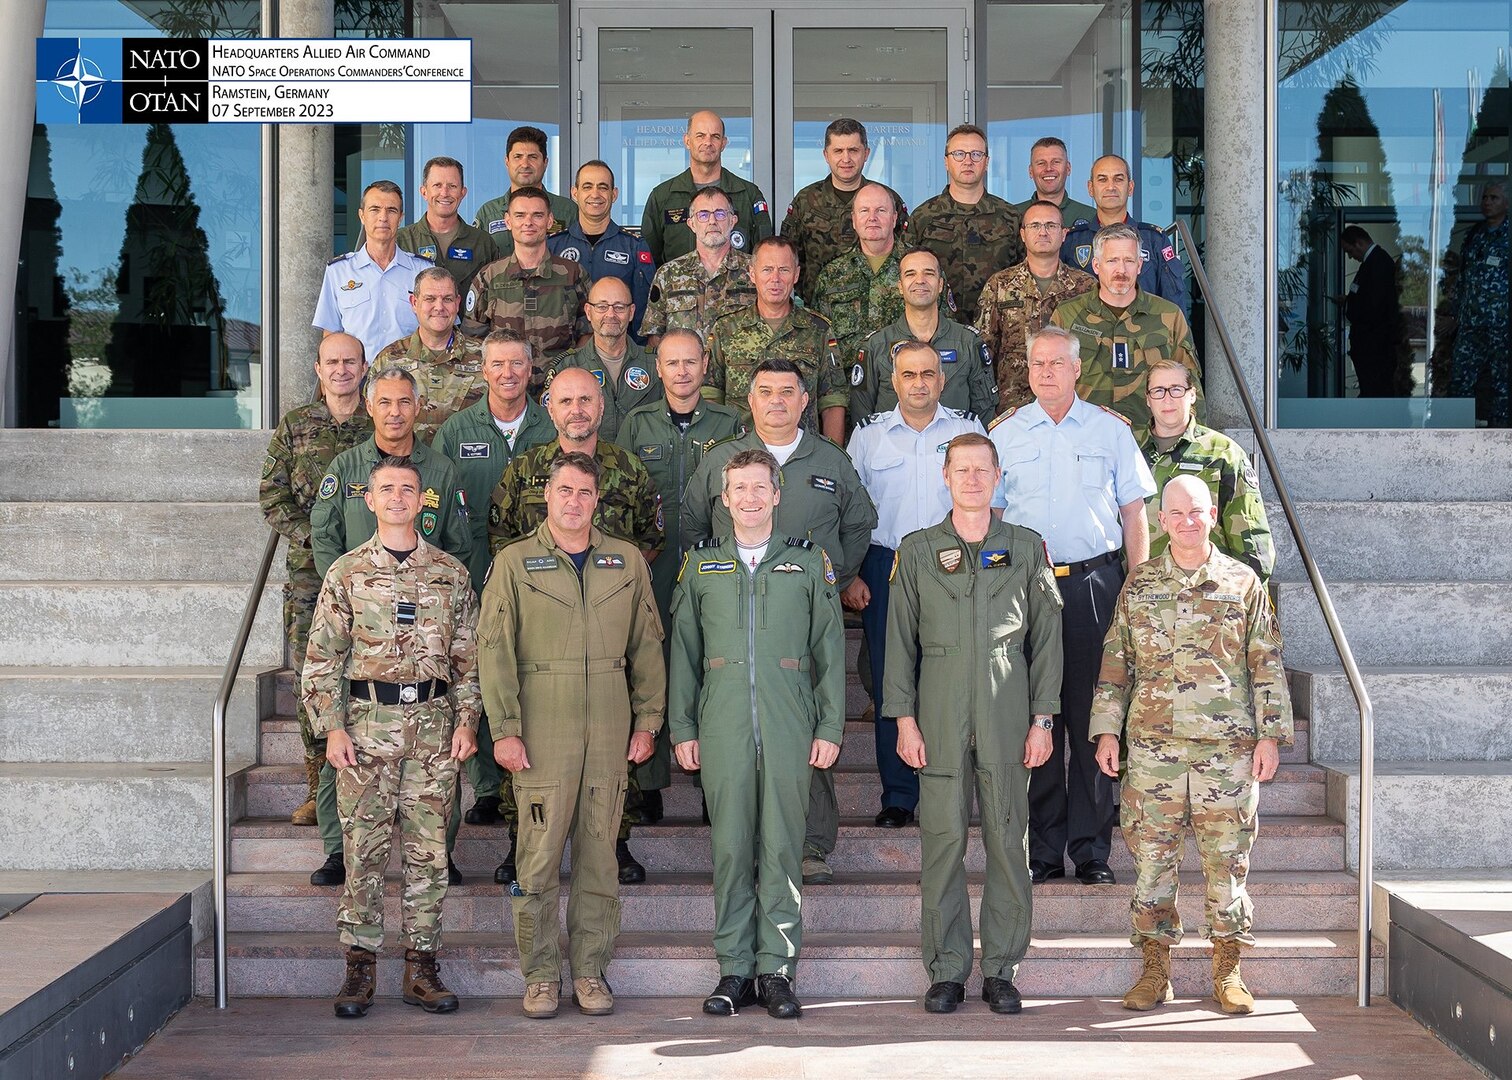 Group photo of military members